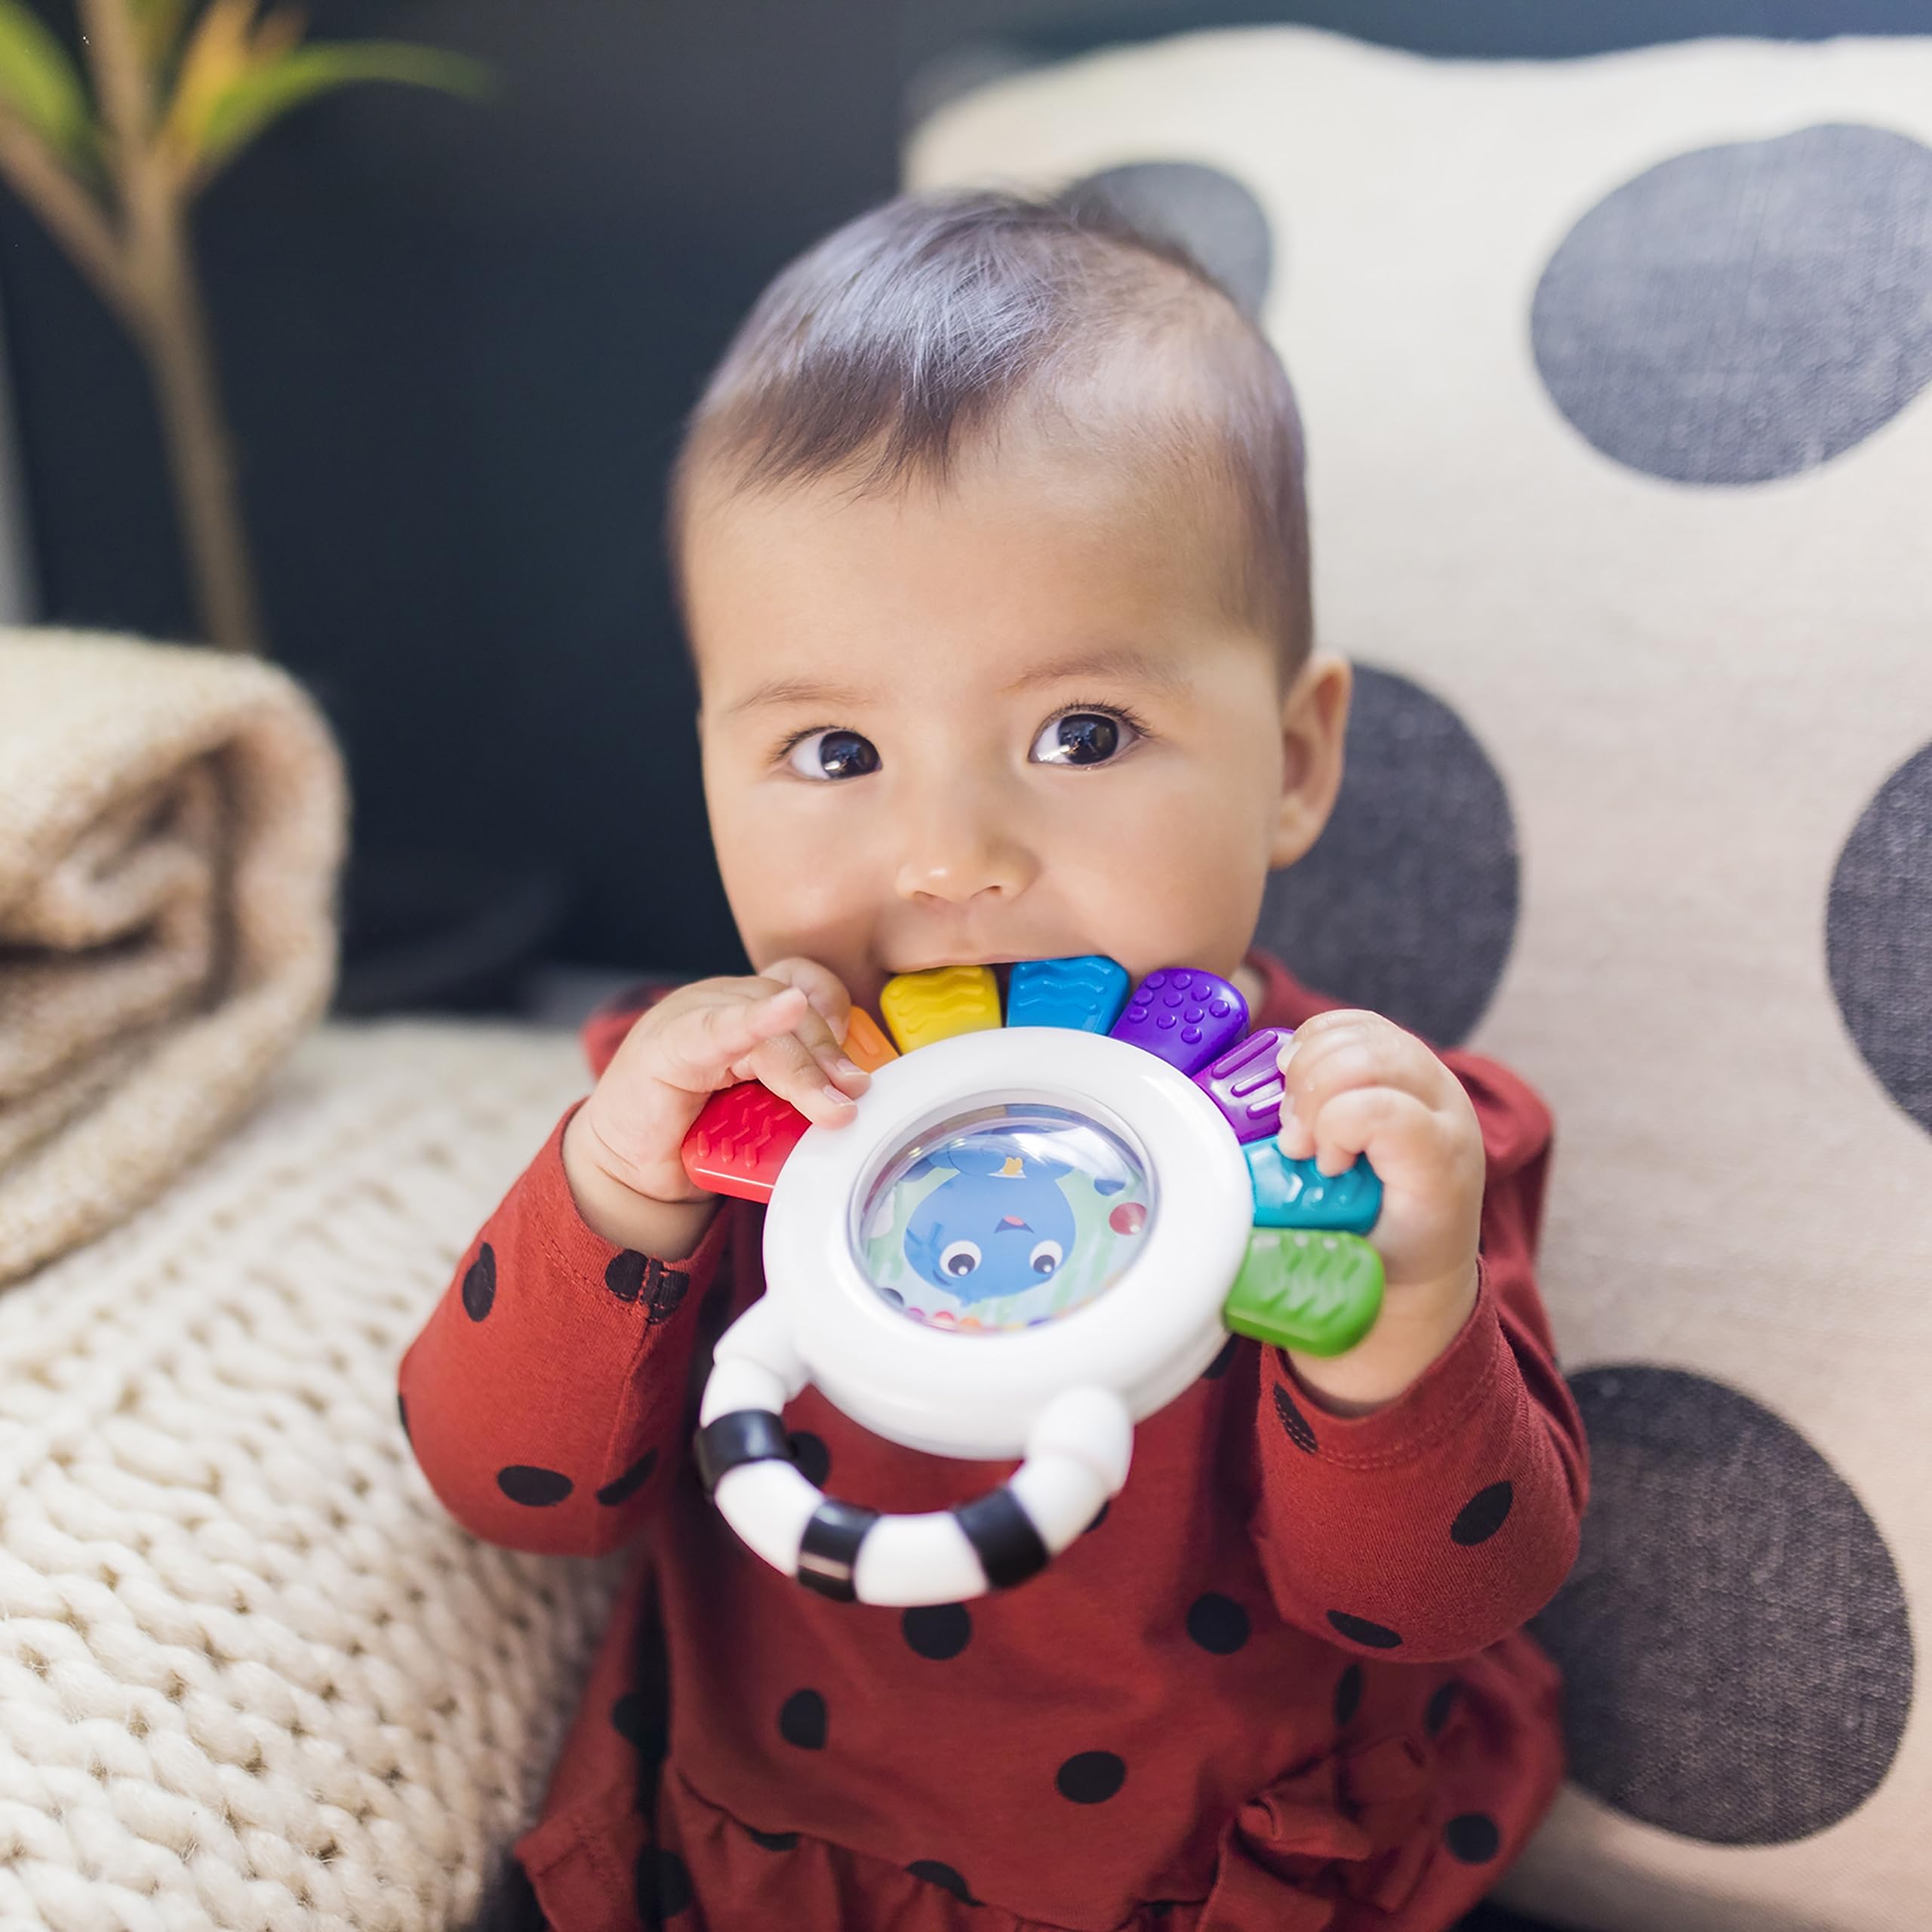 Baby Einstein Outstanding Opus The Octopus Sensory Rattle & Teether Multi-Use Toy, BPA Free & Chillable, 3 Months & up, Multicolored